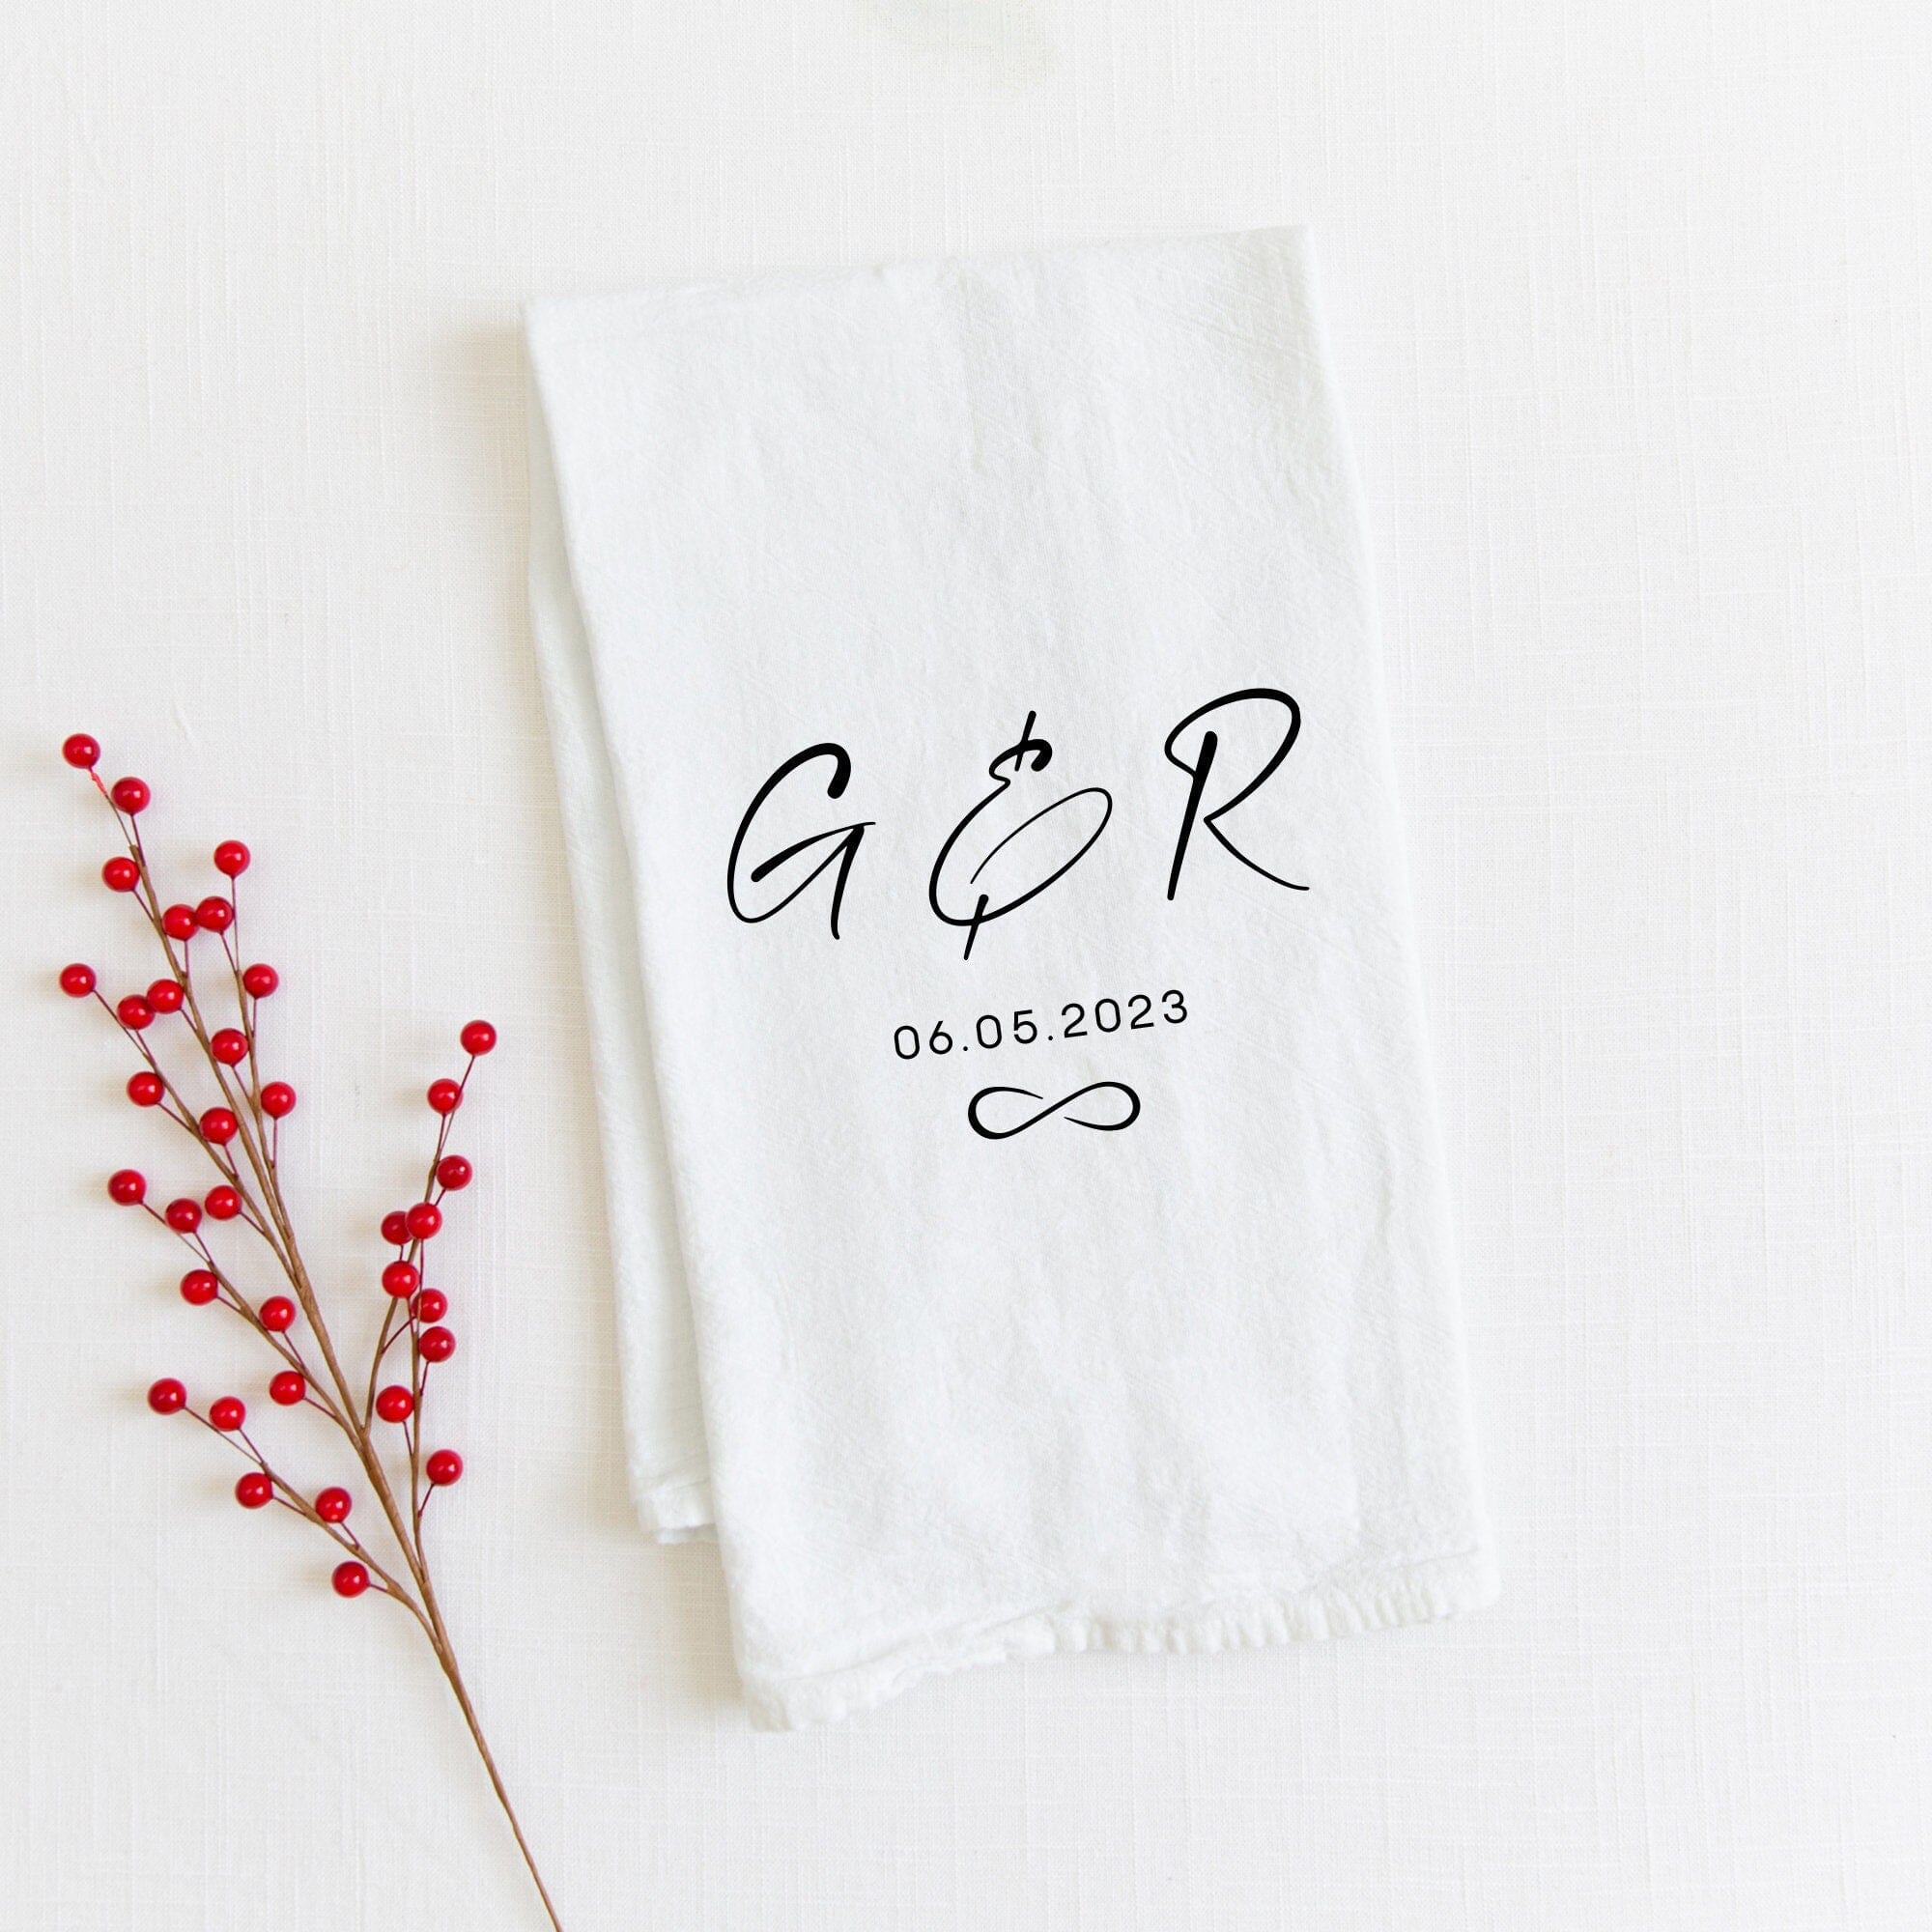 Personalised tea towel with couple initials and est date, Engagement gift for new engaged